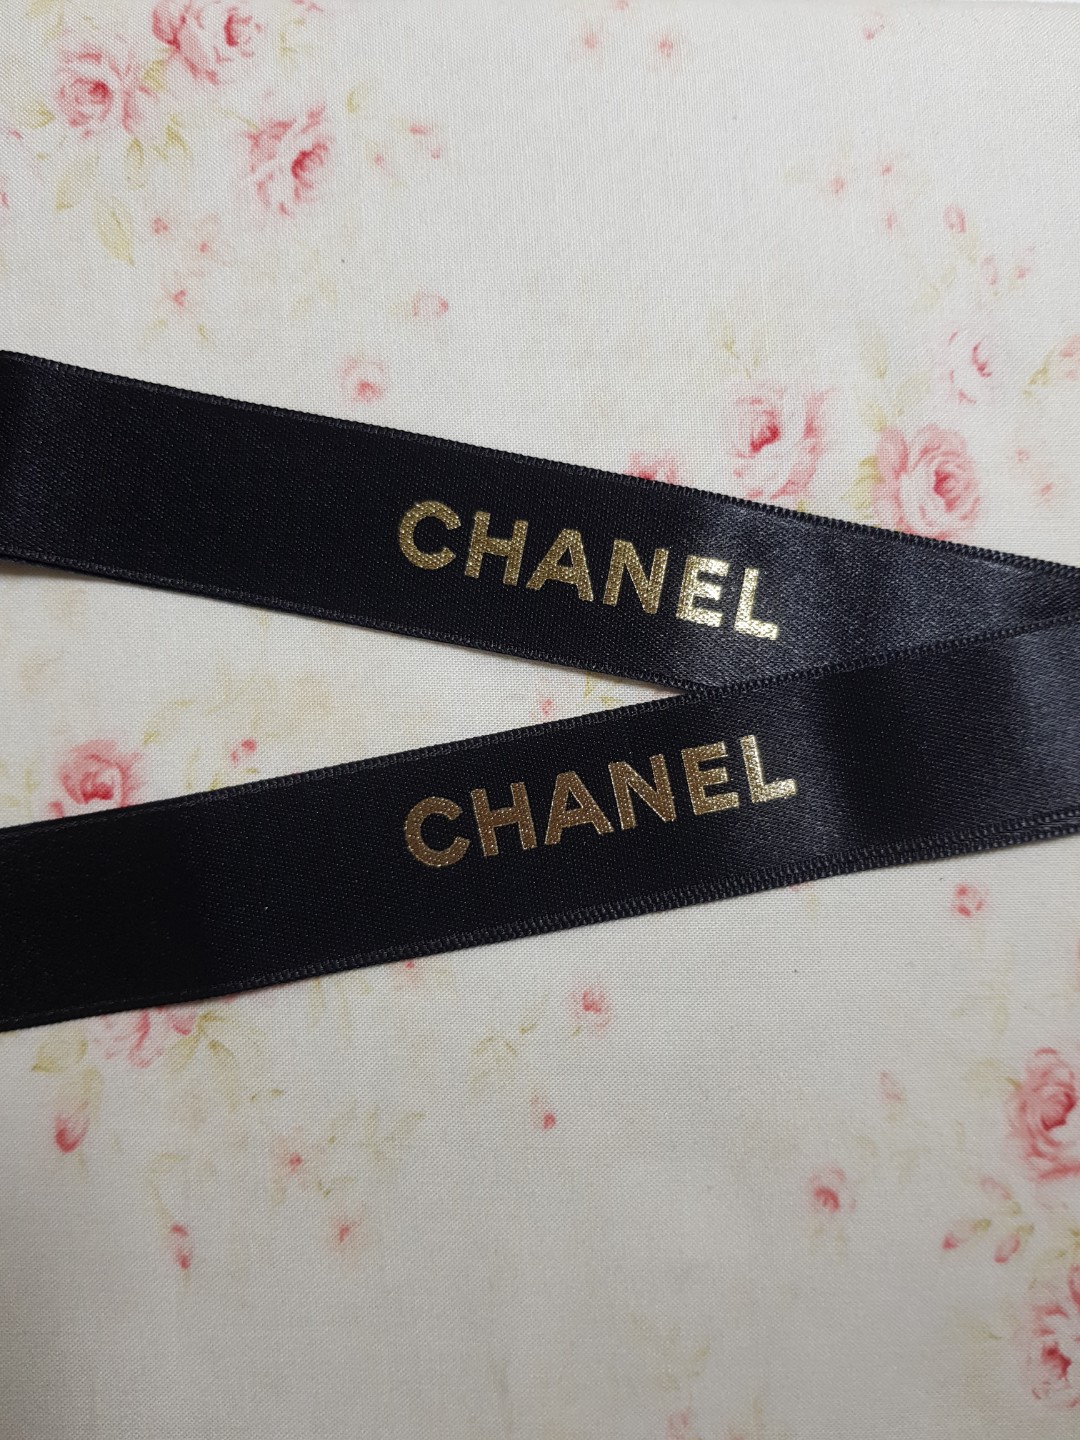 Authentic Chanel ribbon in black with gold wordings